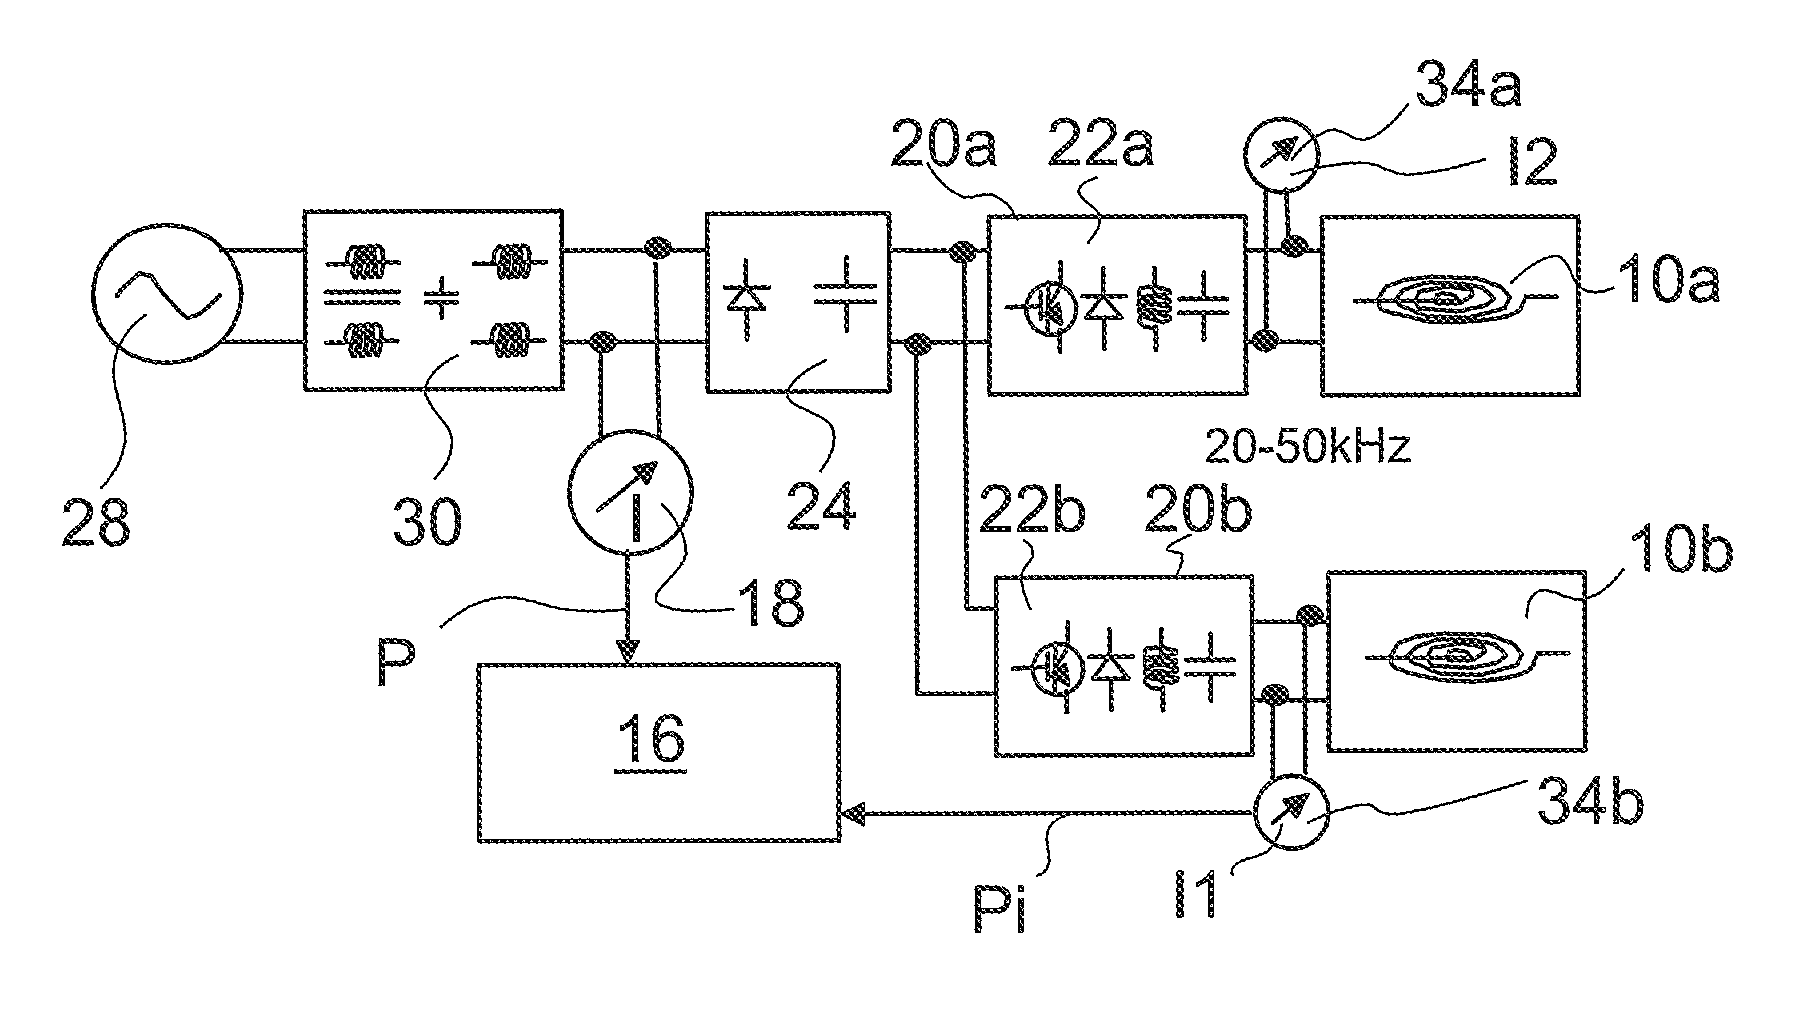 Induction HOB comprising a plurality of induction heaters